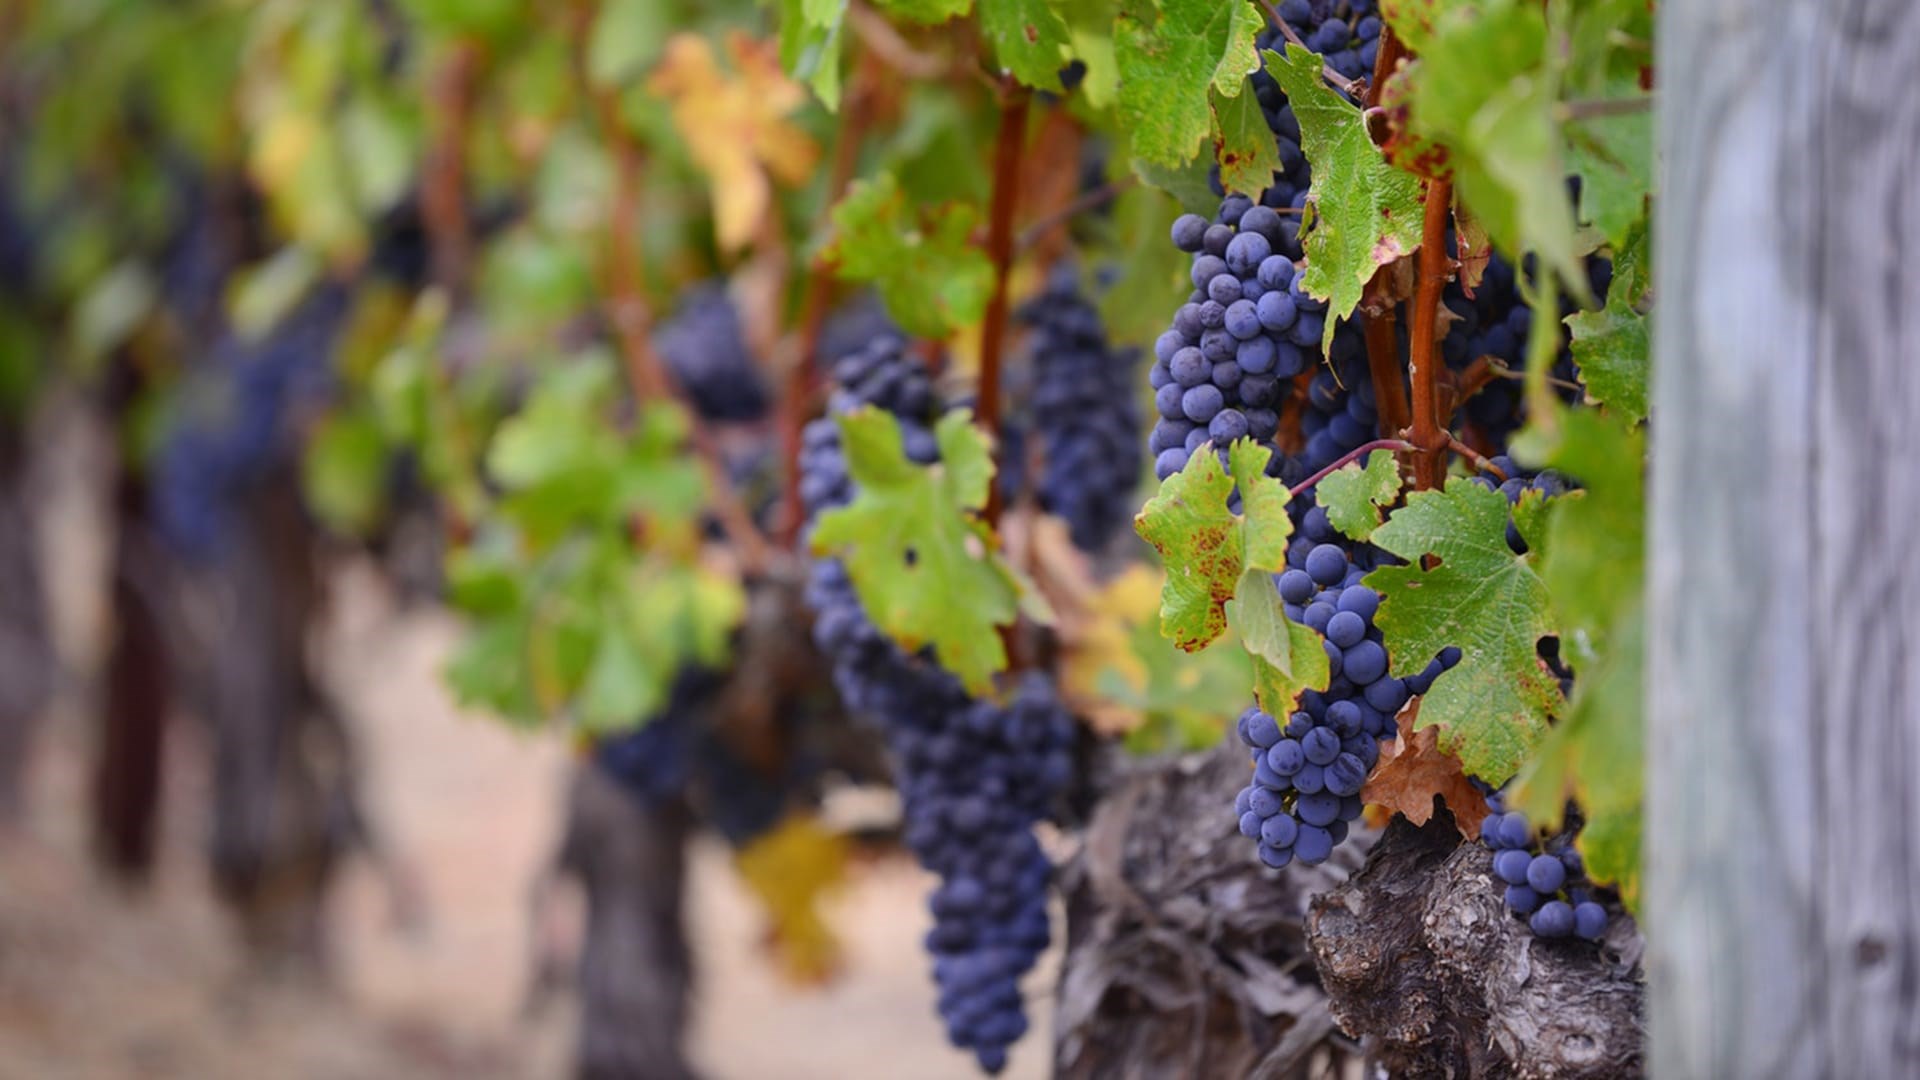  Vitis vinifera is the most widespread species in wine production